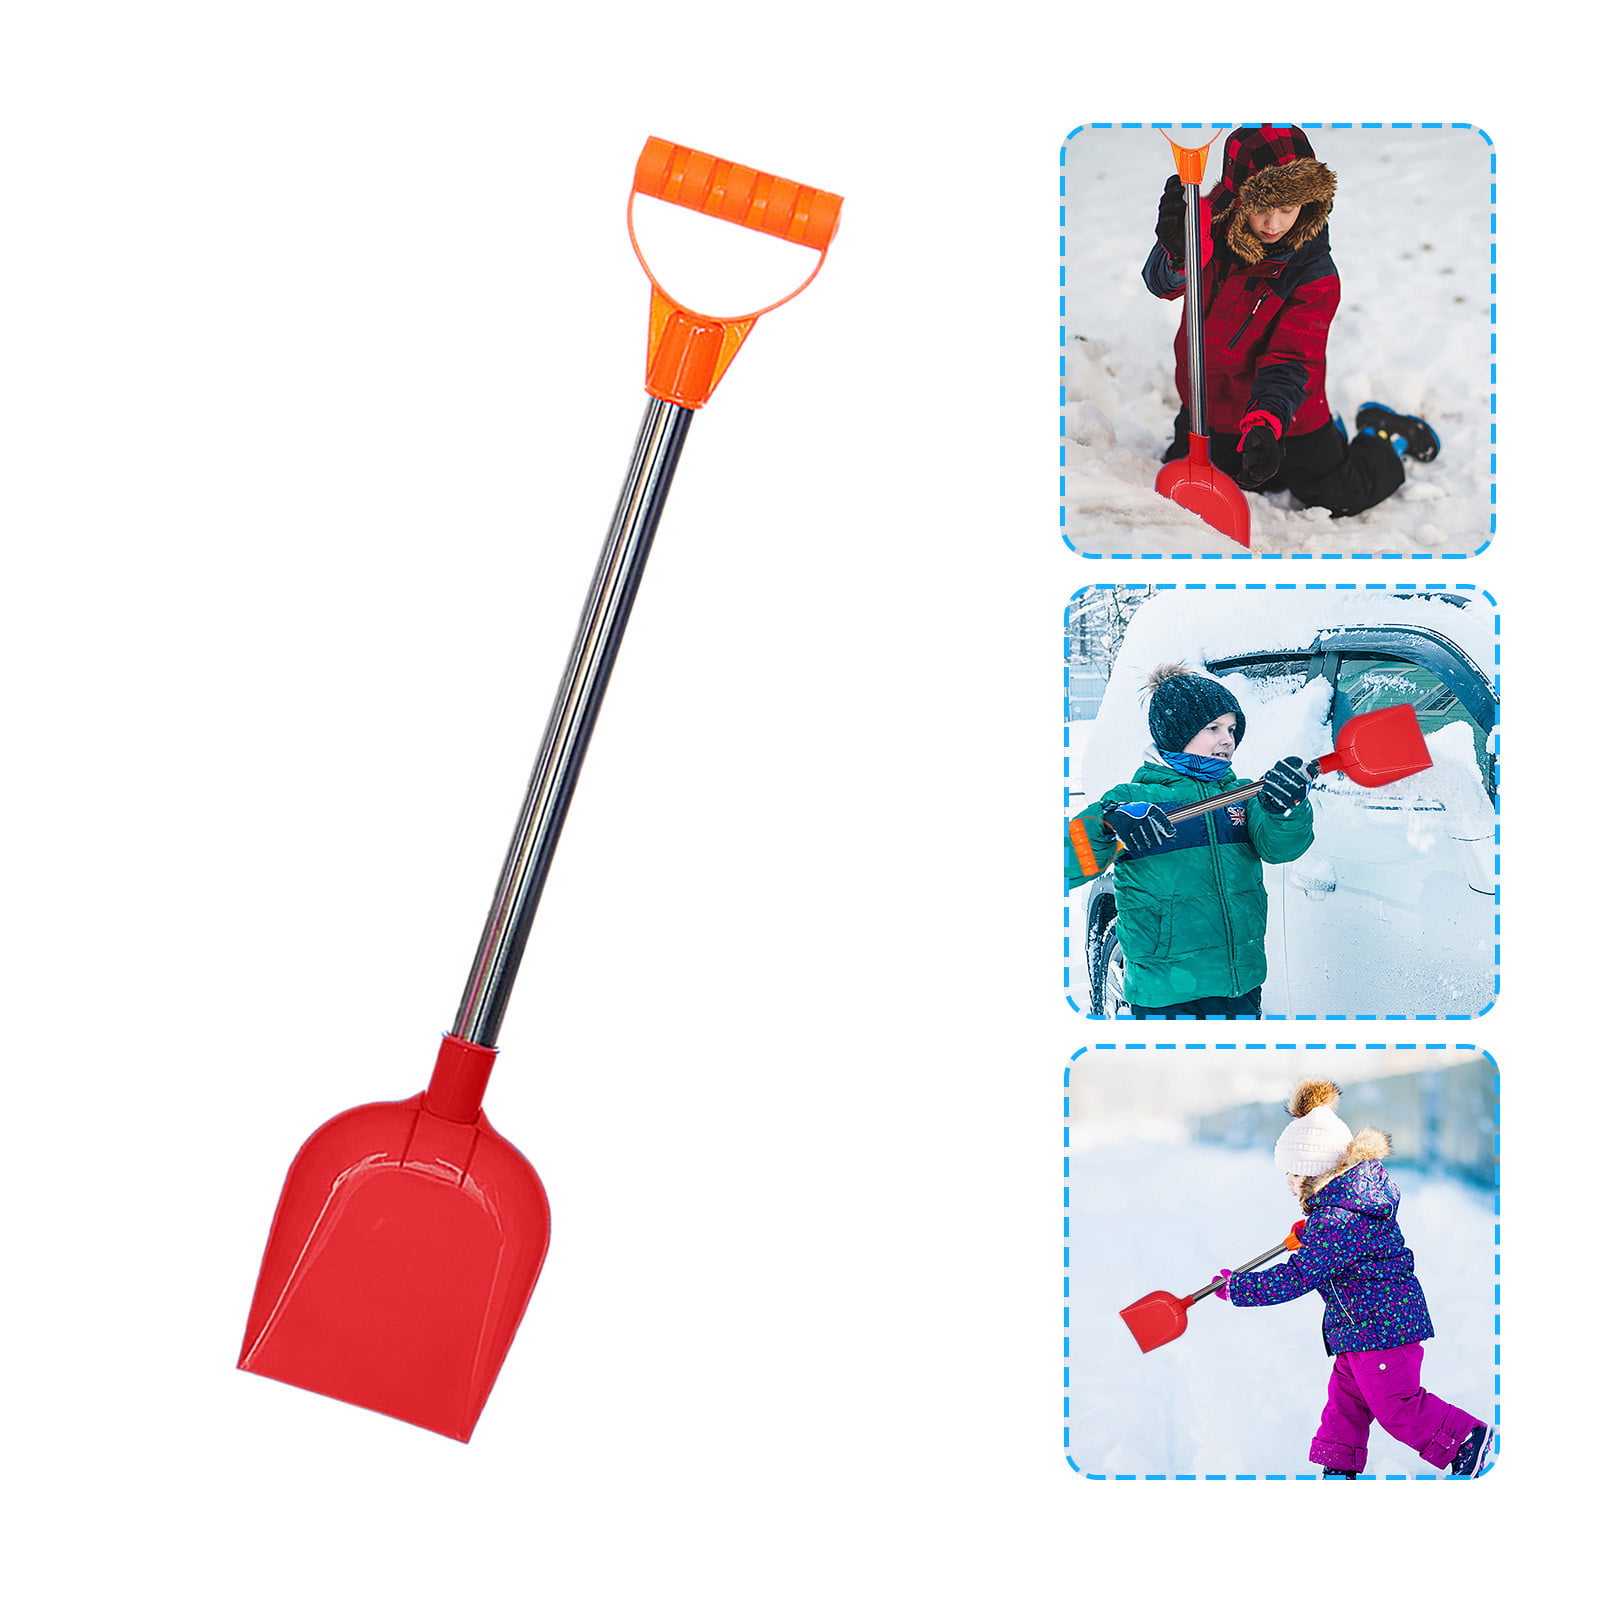 opdtiy Kids Snow Shovel for Kids Age 3 to 12 Dune Spoons Beach Diggers Plastic Kid Sand or Snow Kids Gardening Snow Shovel Driveway Car Home Garage Plastic Bend Proof Design for Snow Removal 